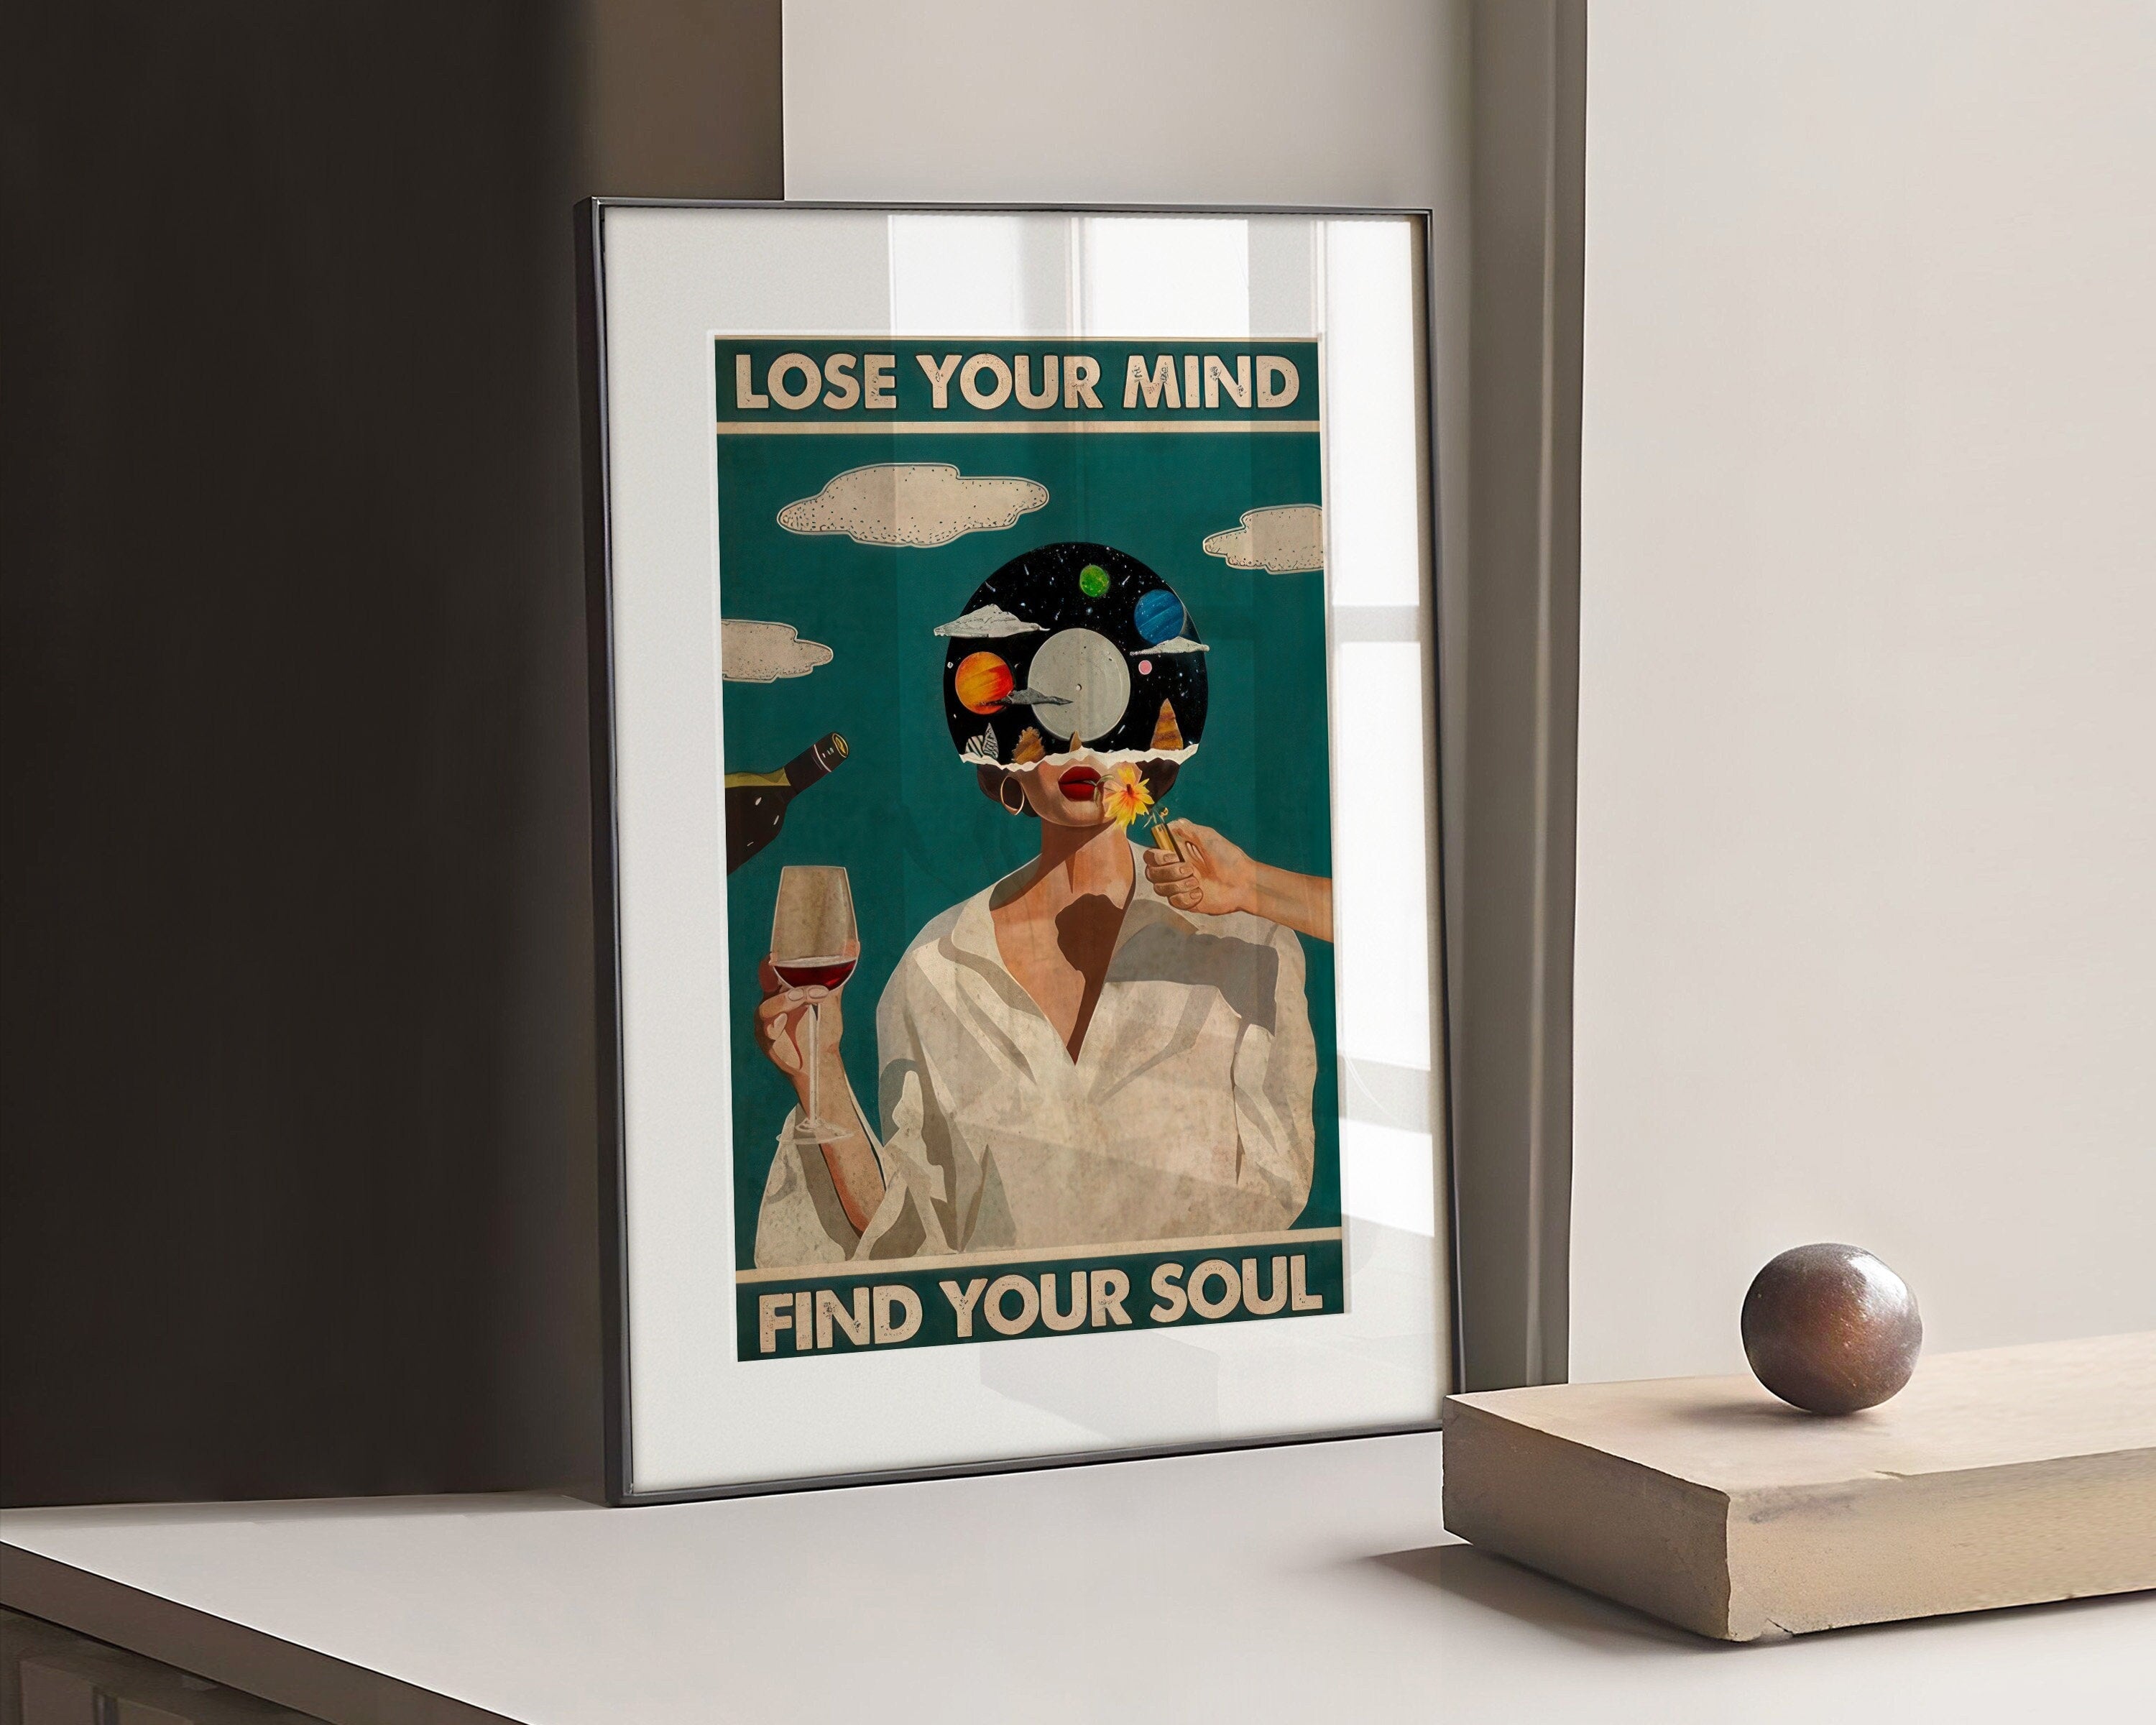 Set against a vibrant green backdrop, the poster features the phrase 'Lose Your Mind, Find Your Soul' in bold white text. This iconic quote, often associated with the transformative power of music, serves as a reminder of the freedom and self-discovery that music can inspire.